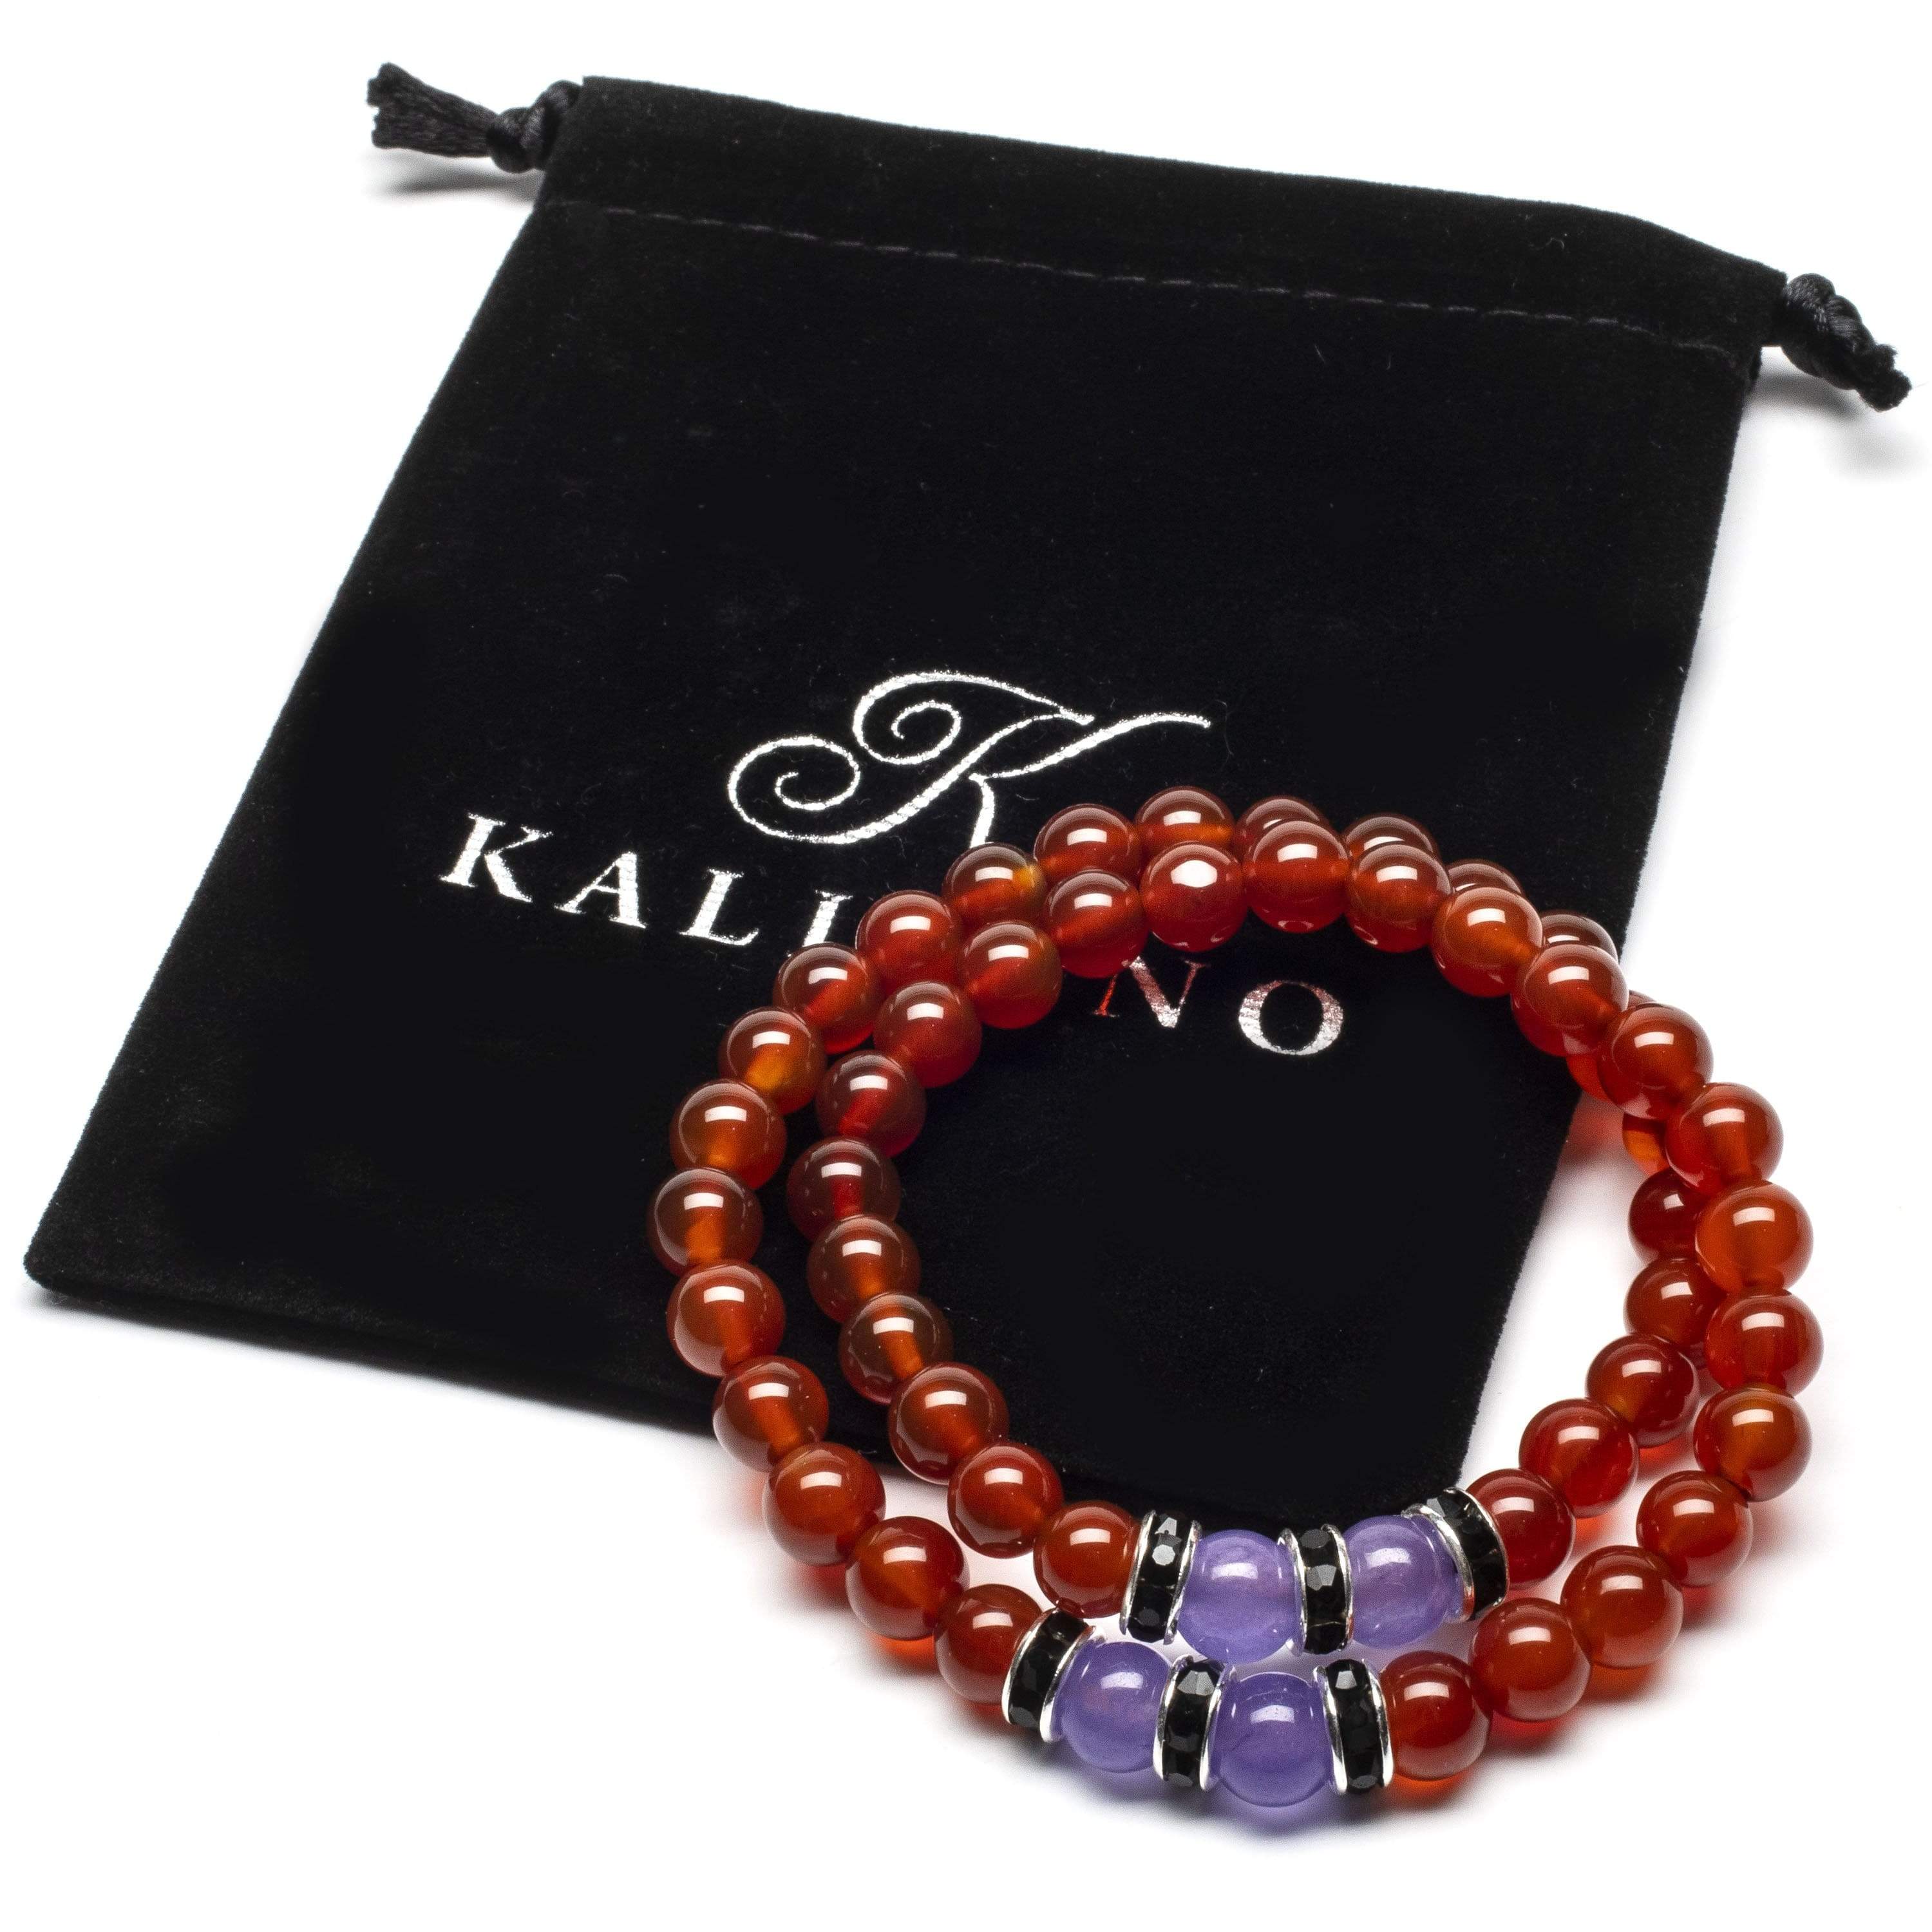 Kalifano Gemstone Bracelets Carnelian 8mm Beads with Purple Agate and Black and Silver Accent Beads Double Wrap Elastic Gemstone Bracelet WHITE-BGI2-040